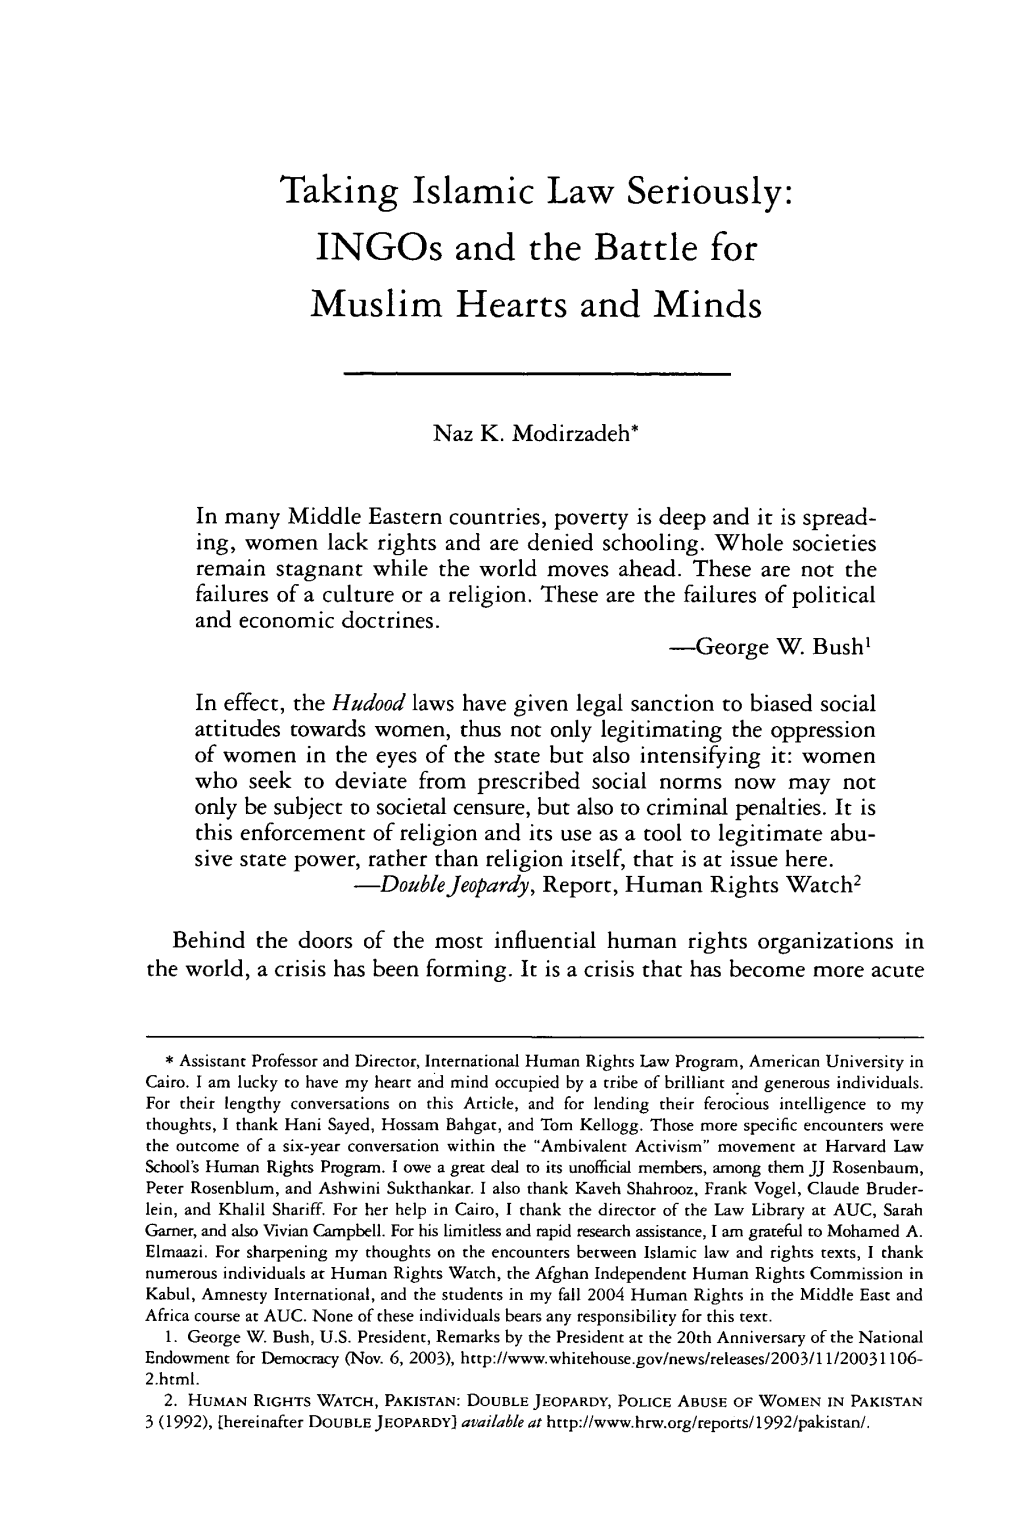 Taking Islamic Law Seriously: Ingos and the Battle for Muslim Hearts and Minds